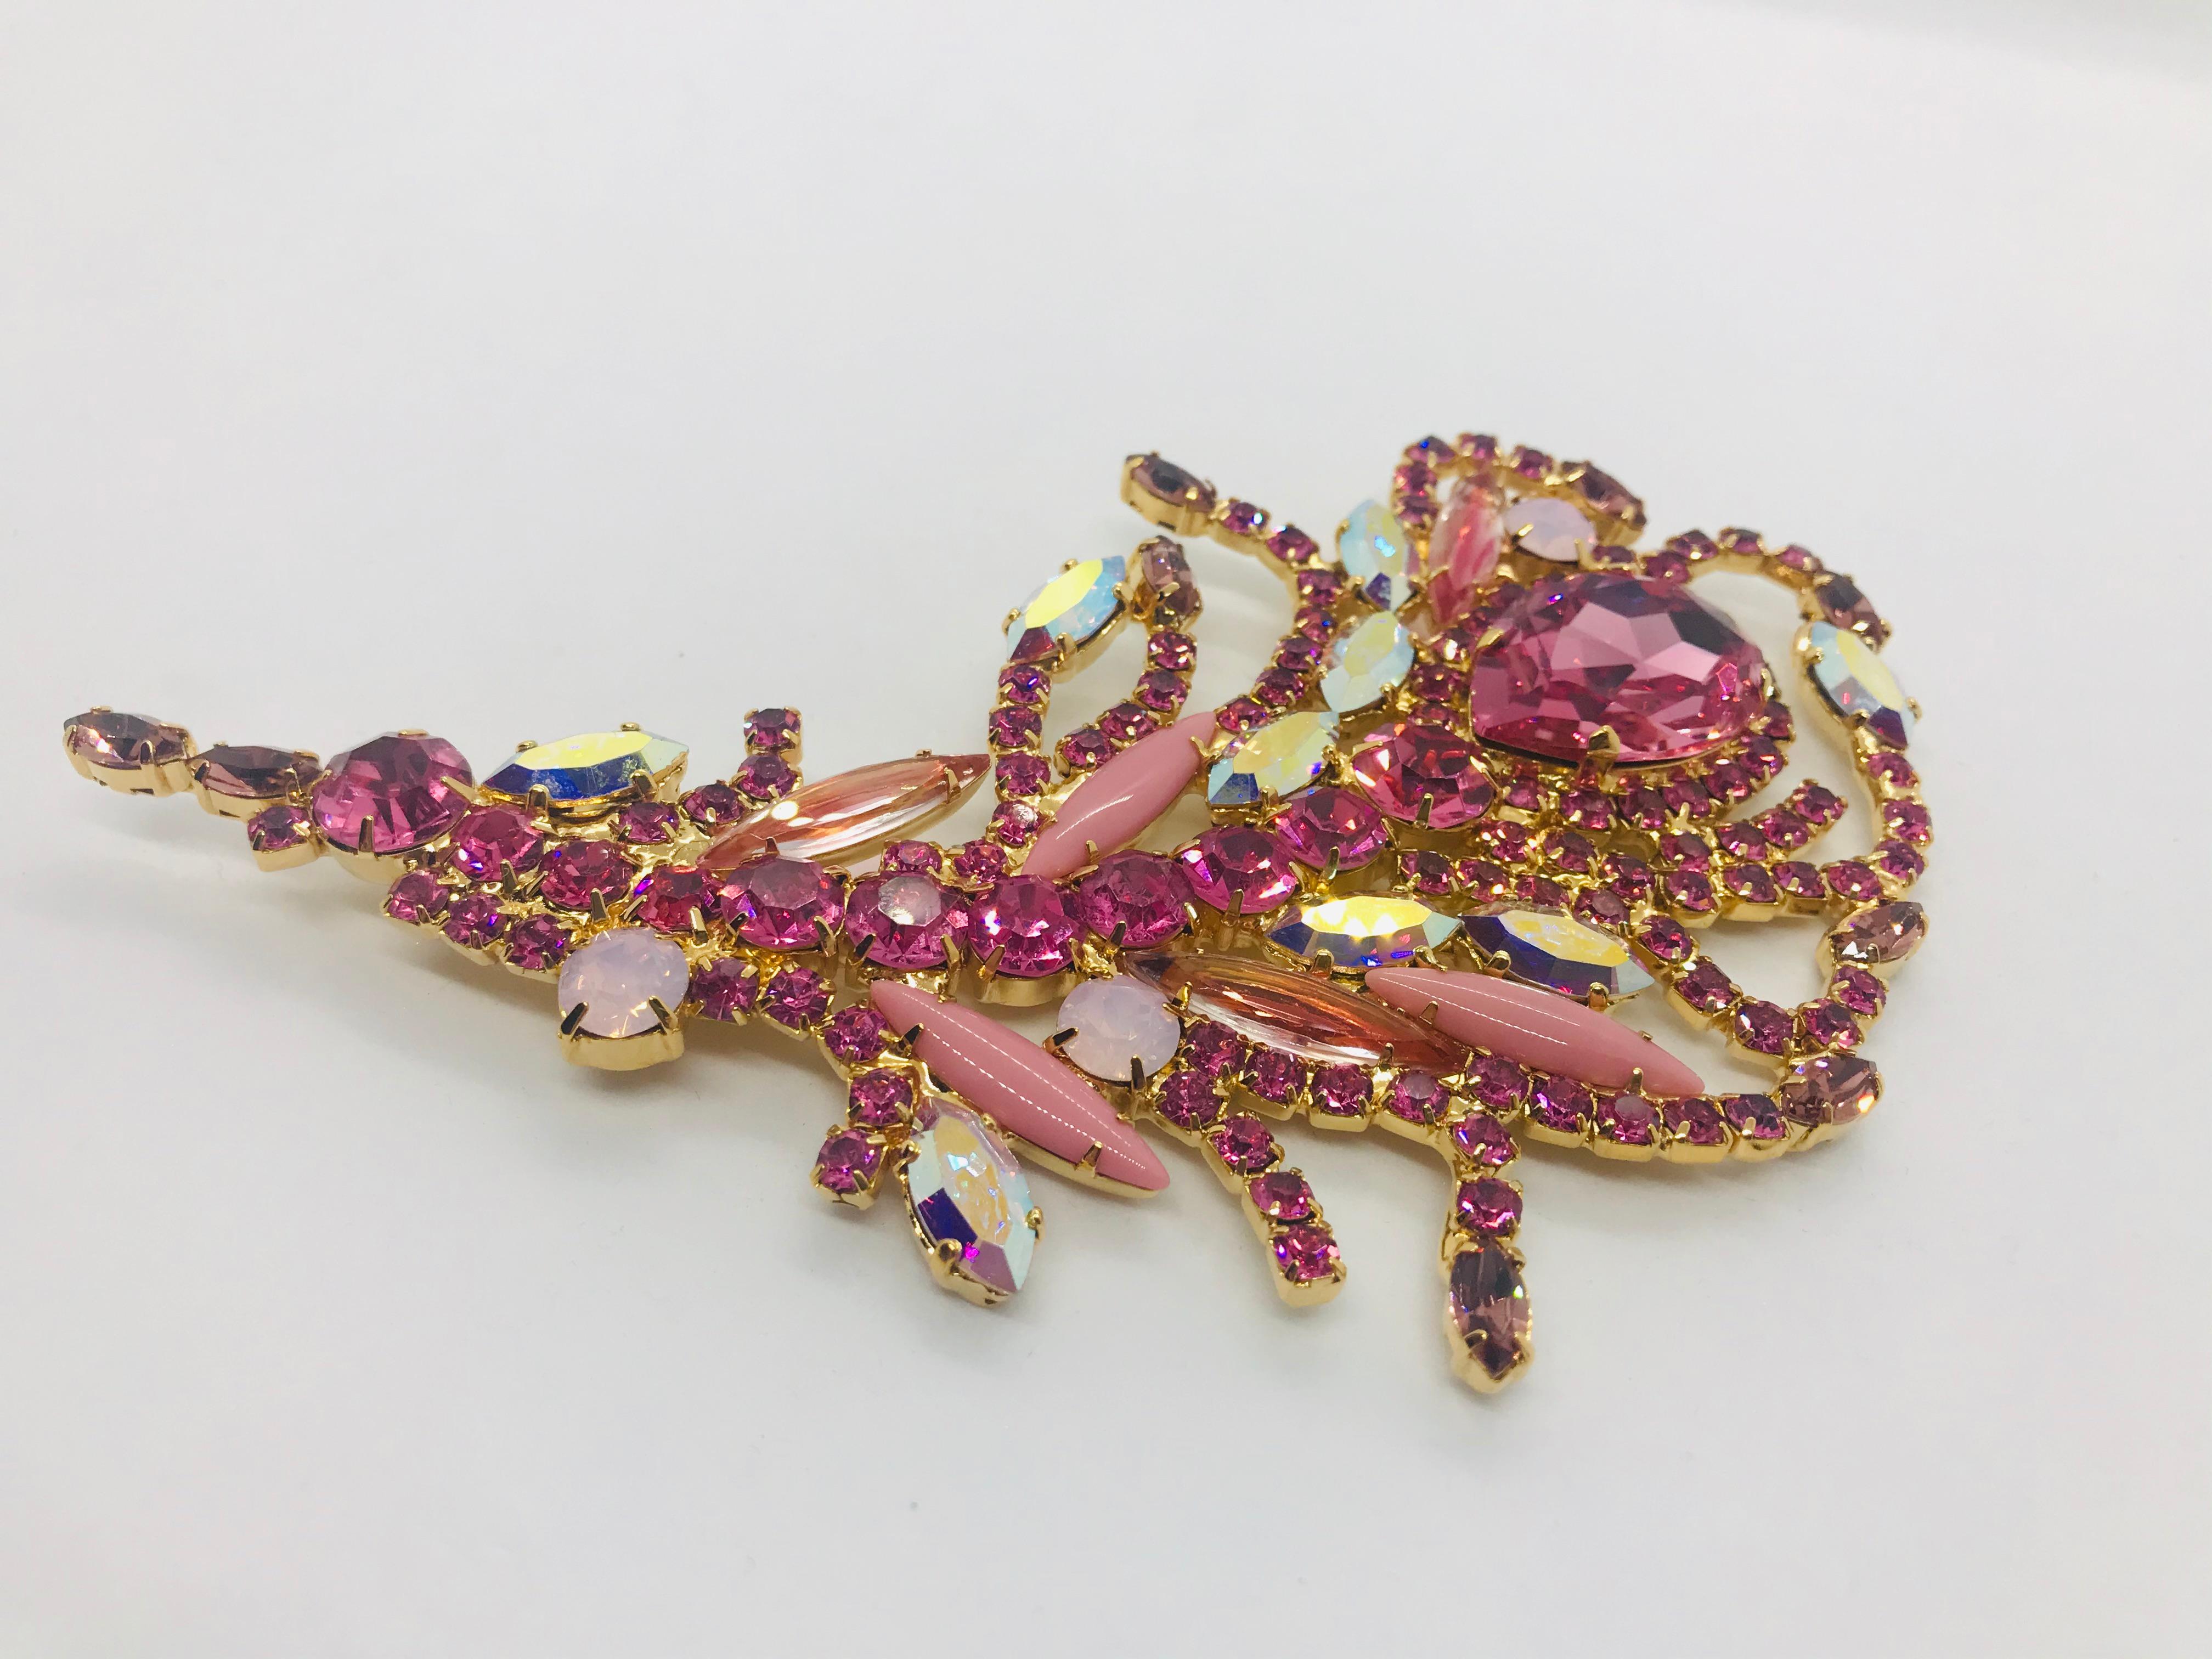 Feathers symbolize trust, strength, wisdom and freedom and we hope that our multi pink and aurora borealis vintage Swarovski feather brooch will remind you of these symbols when you wear it!  This brooch is a bold piece to add to your jewelry